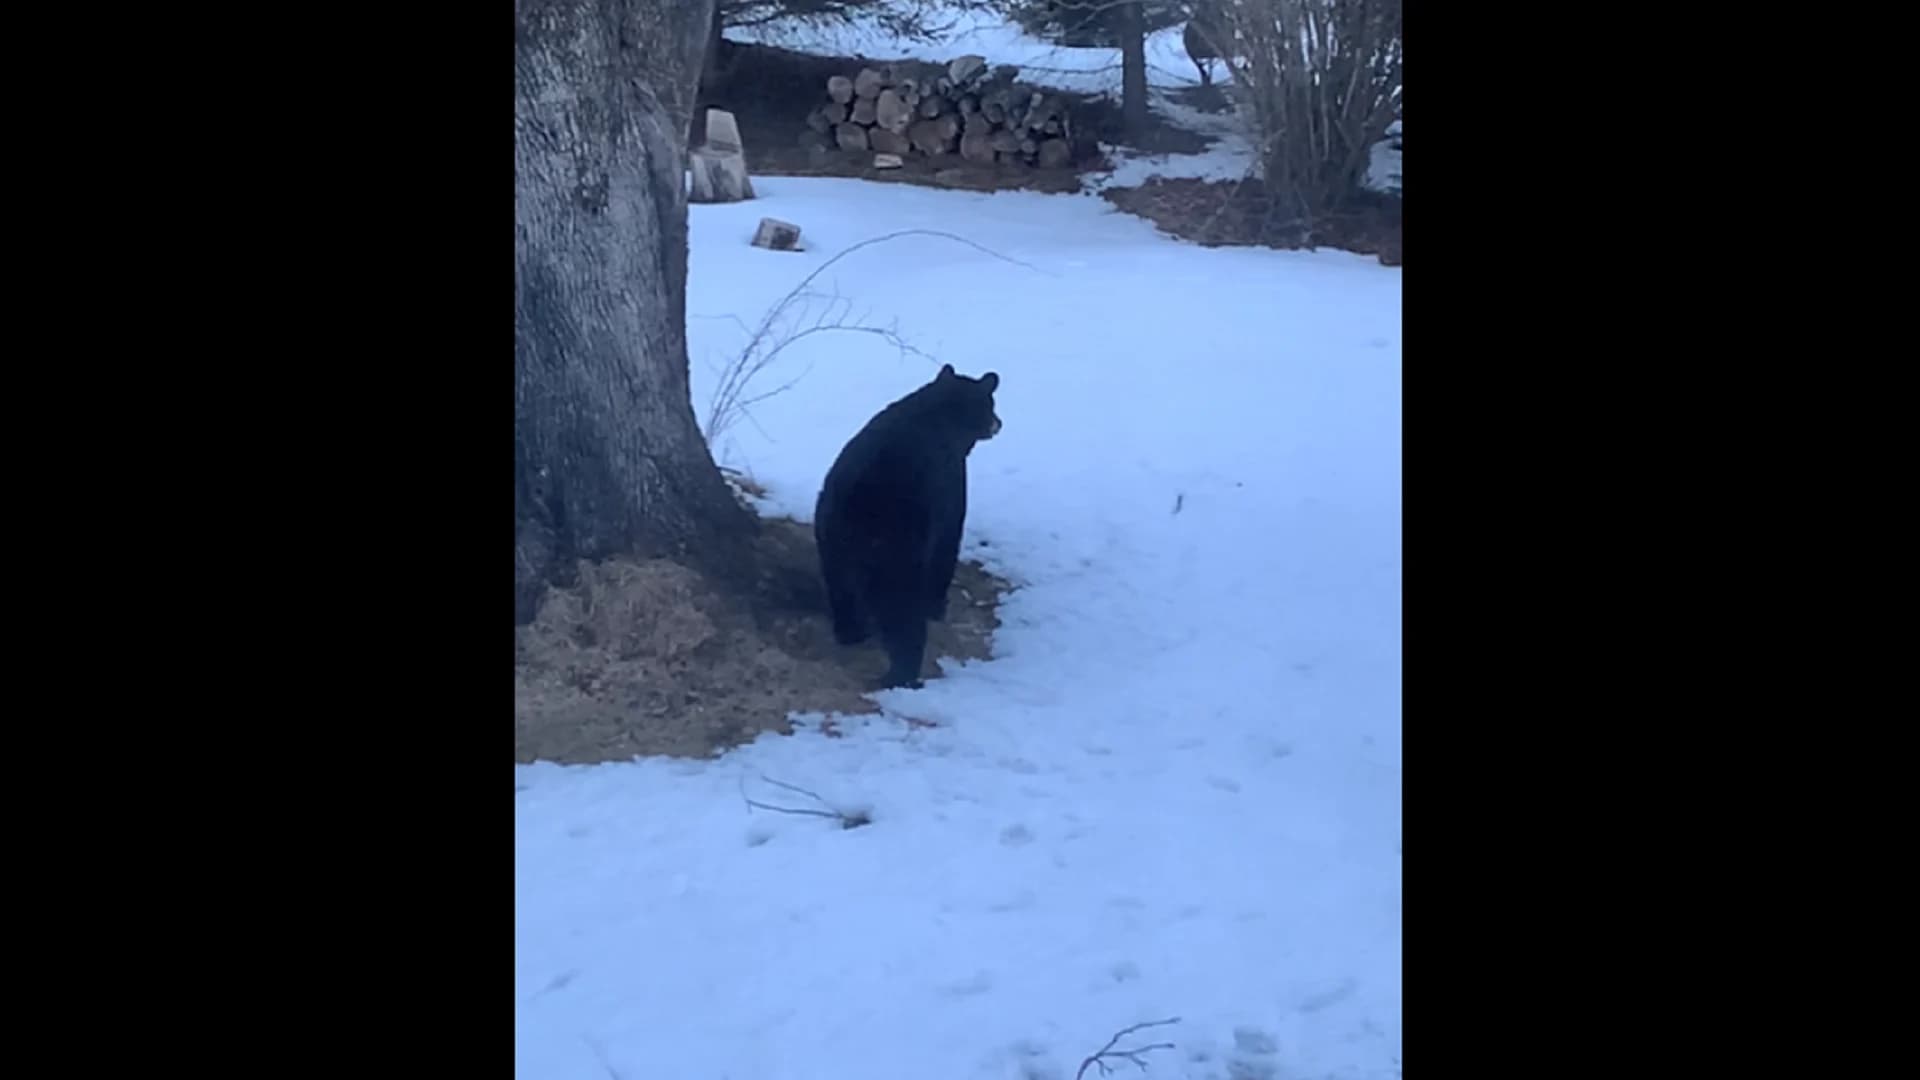 Bear spotted in backyard of Litchfield home